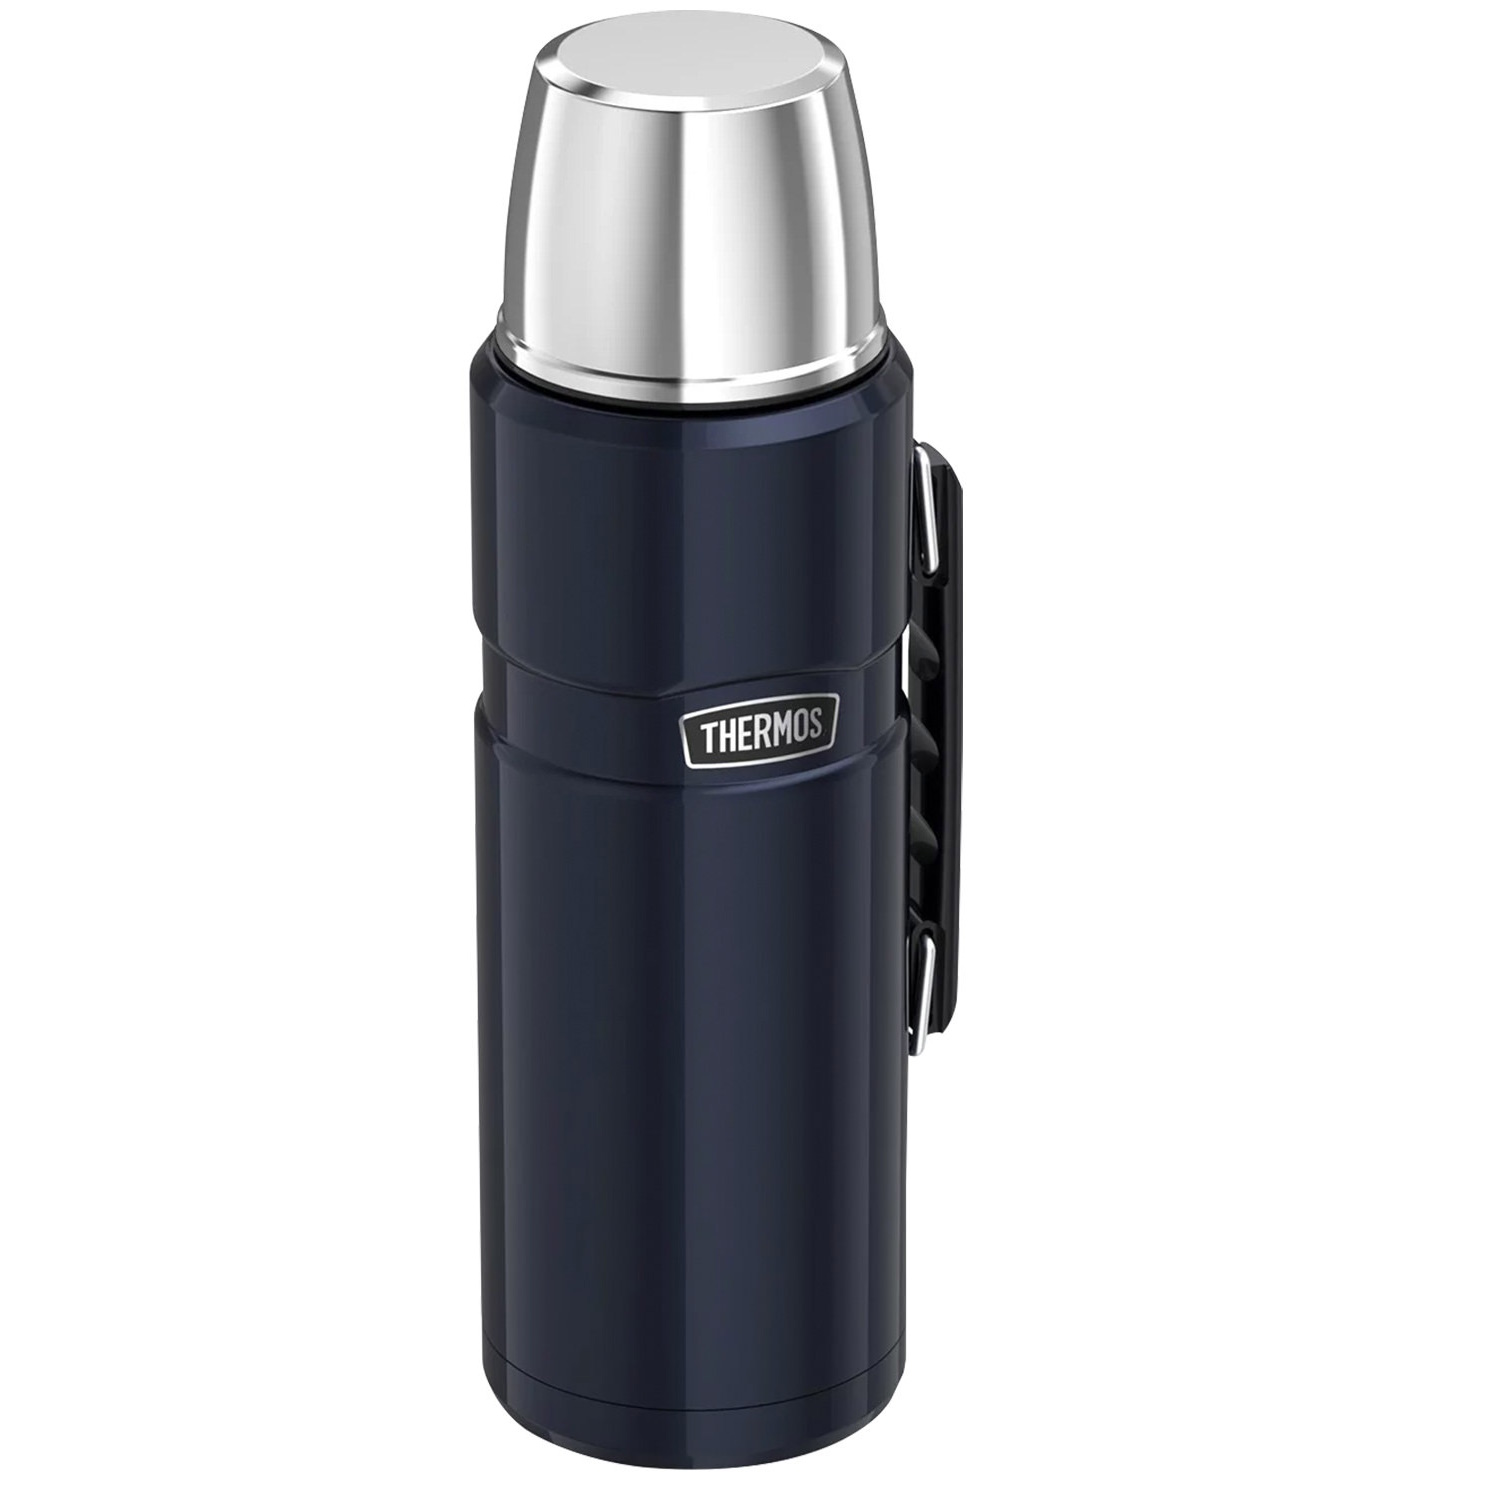 Thermos 1.2L Stainless King™ Stainless Steel Vacuum Insulated Flask Midnight Blue